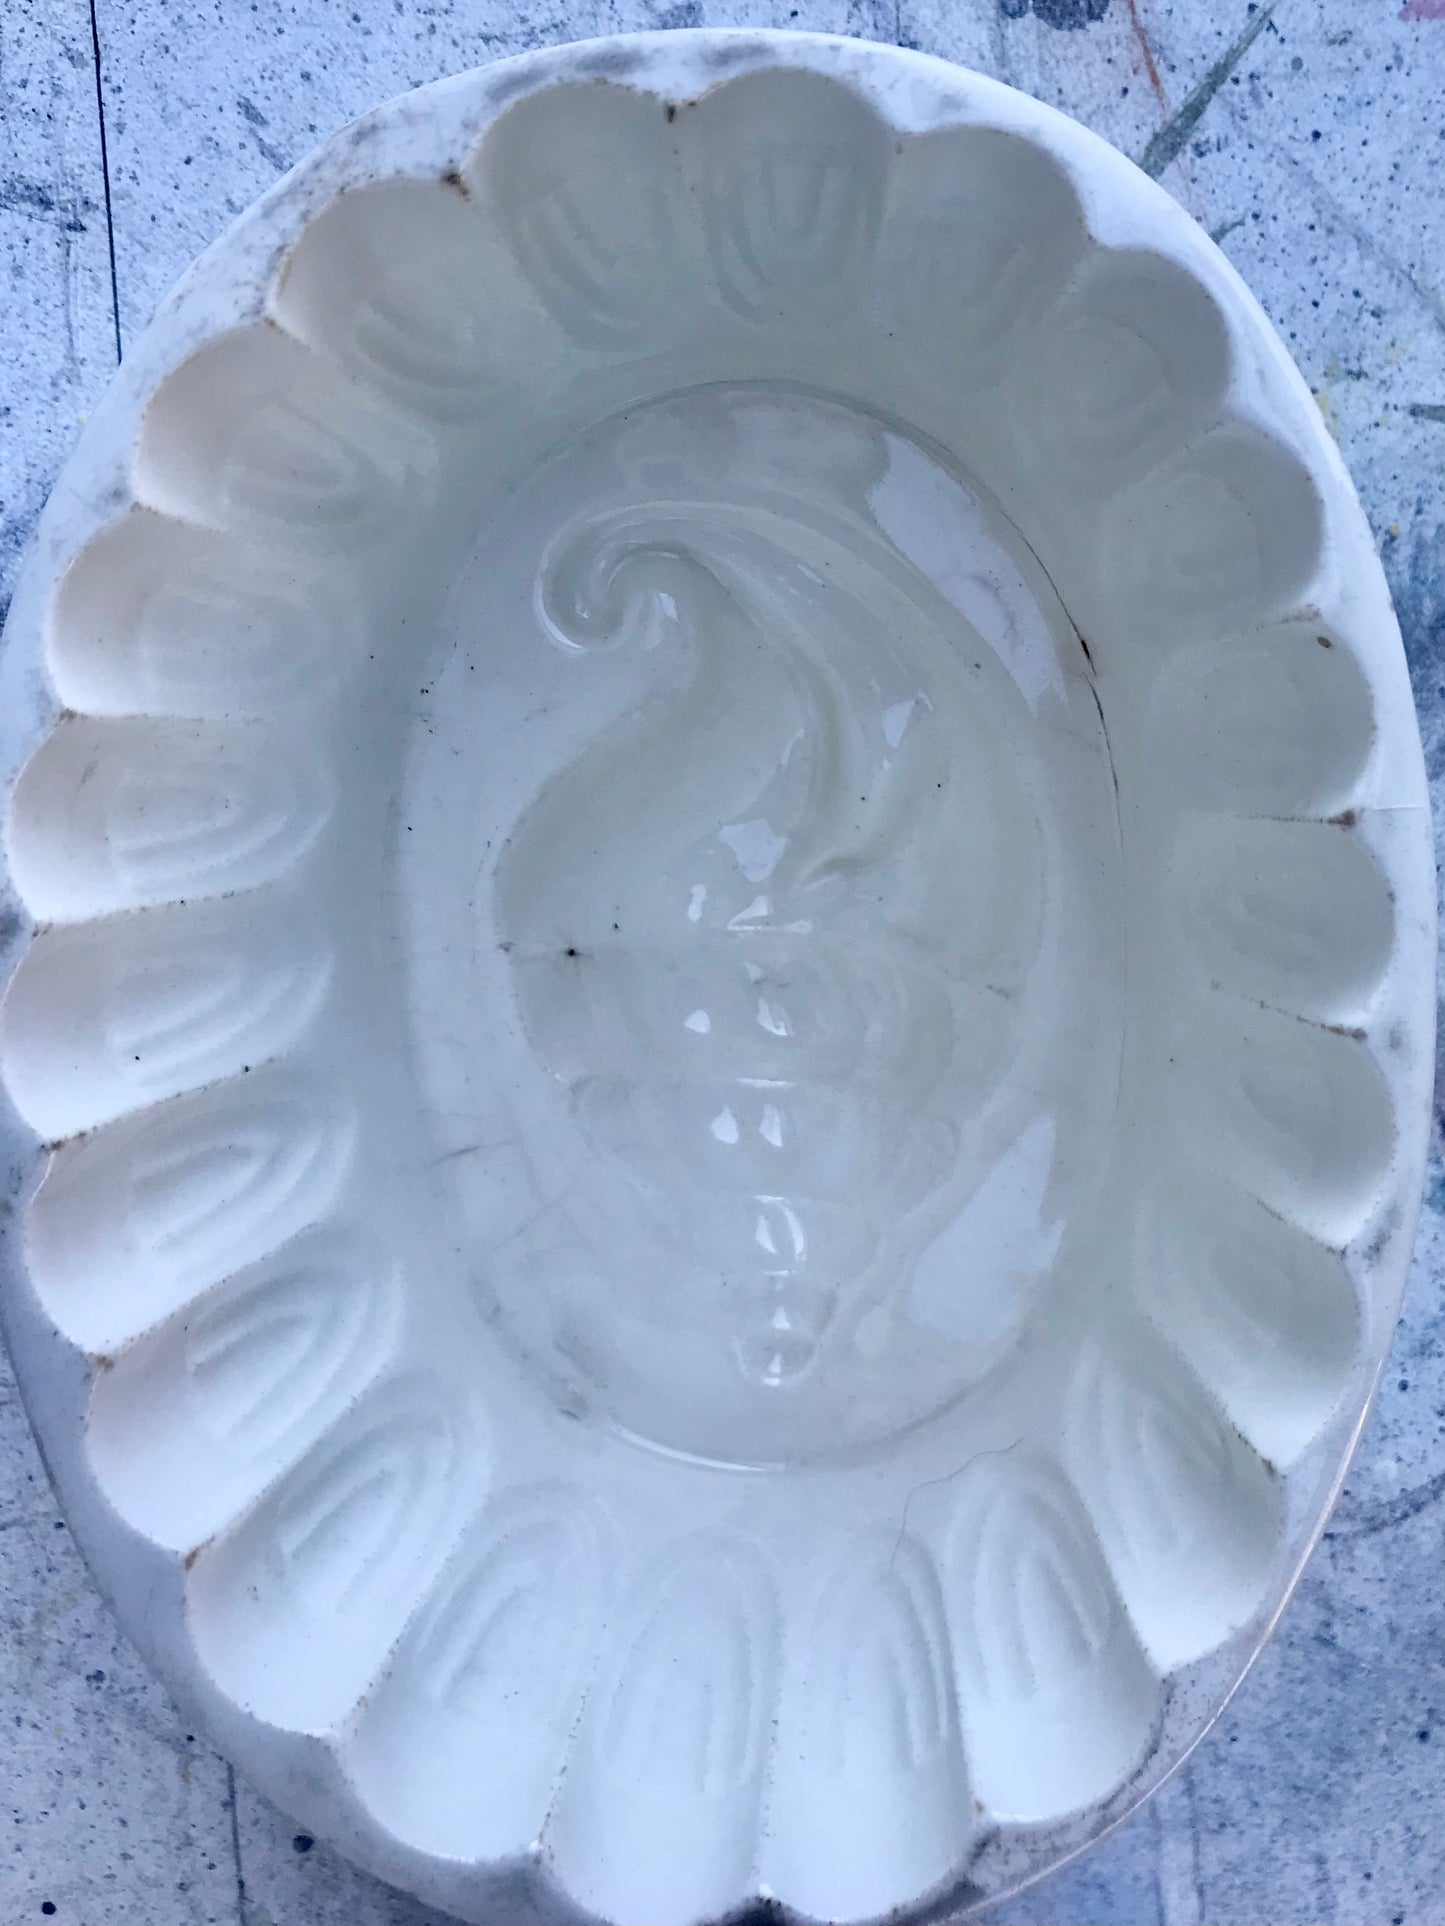 Vintage Ironstone ceramic jelly mould with shell design 15cm w x 12cm l x8.5cm high